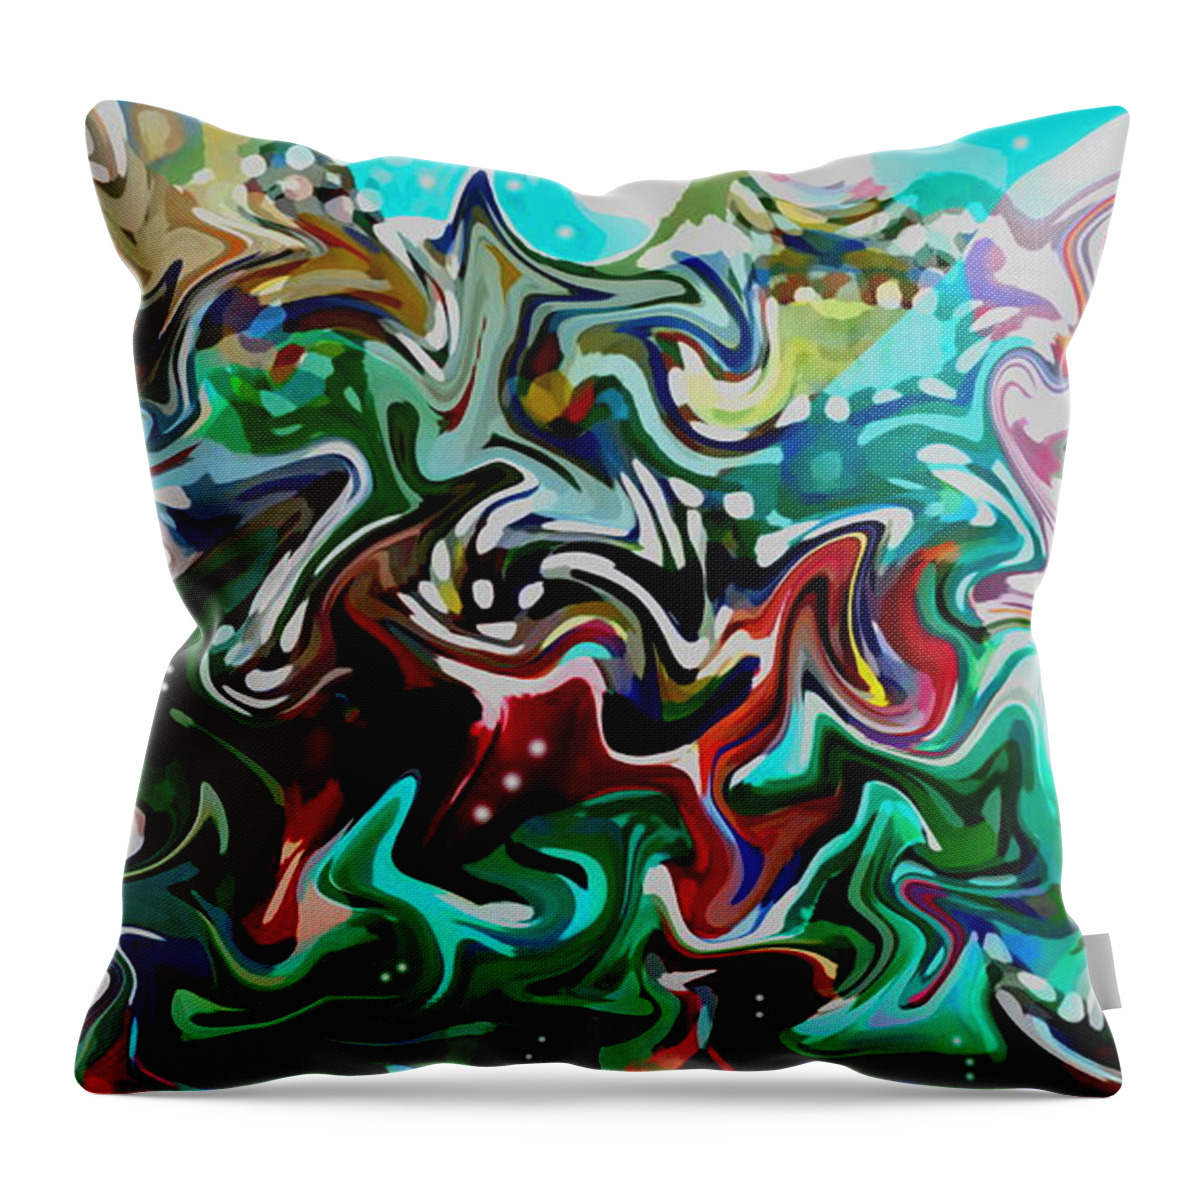 Abstract Throw Pillow featuring the digital art Shaken Not Stirred by Shelli Fitzpatrick